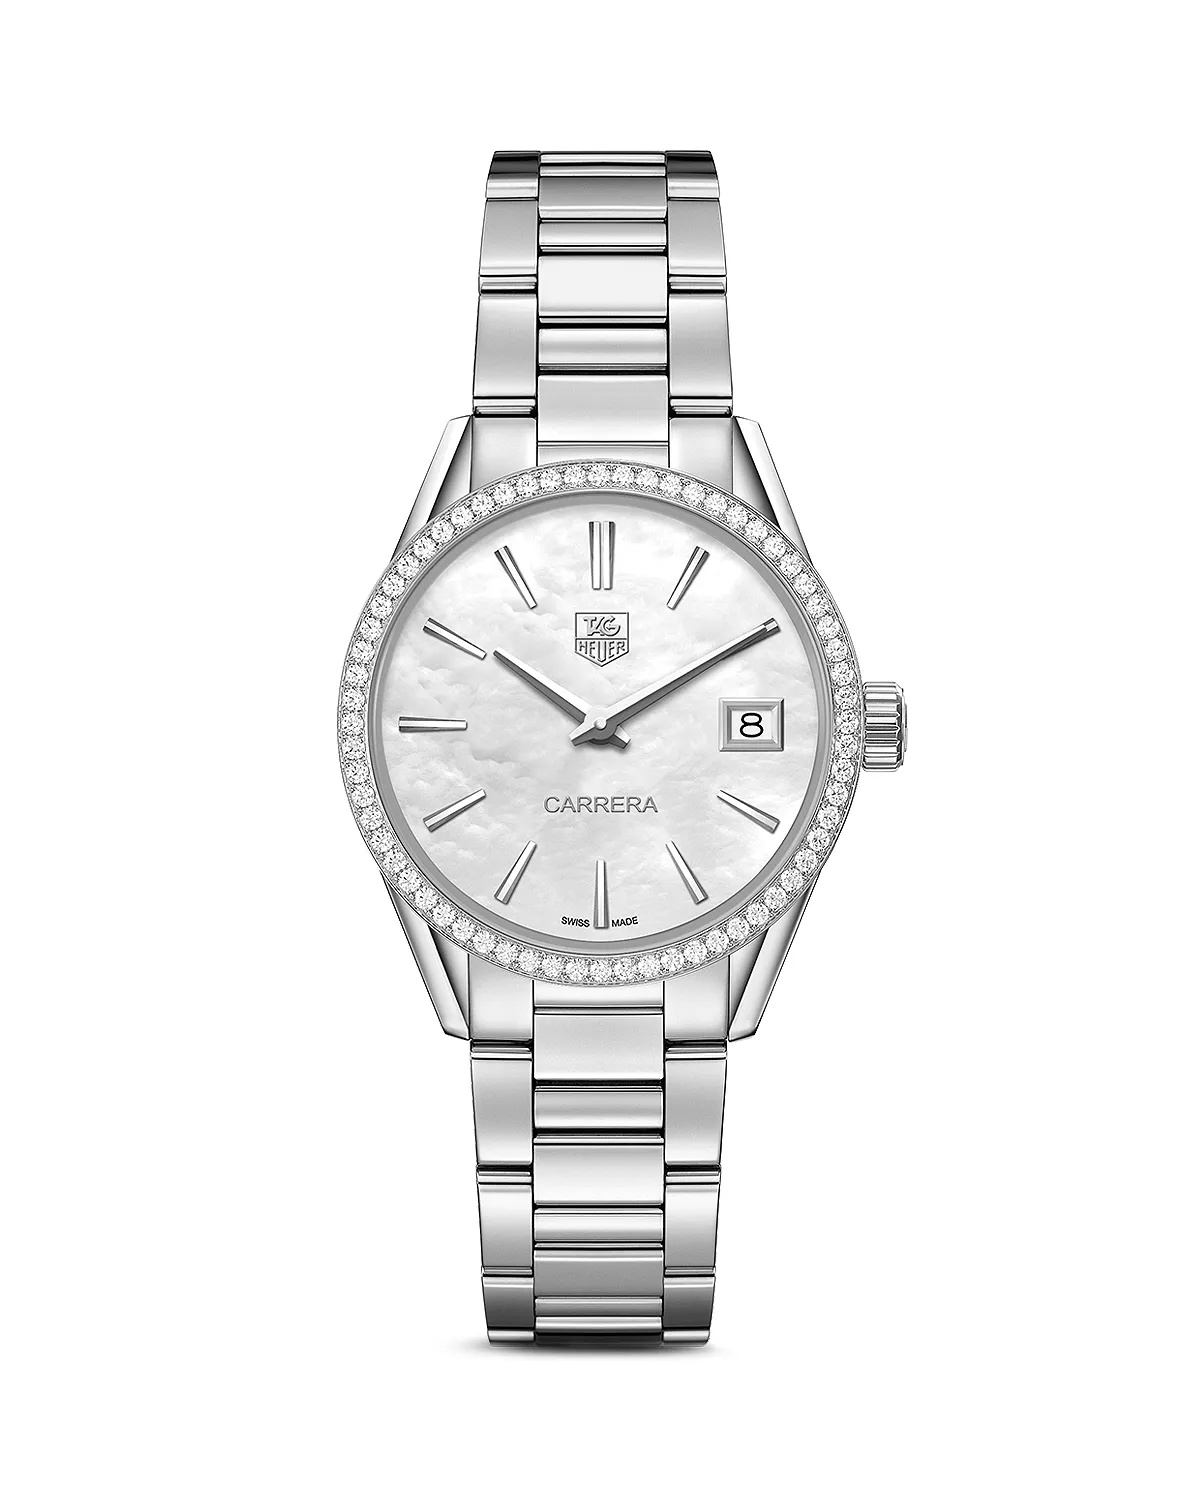 Carrera Stainless Steel and White Mother of Pearl Dial Watch with Diamond Bezel Case, 32mm - 1